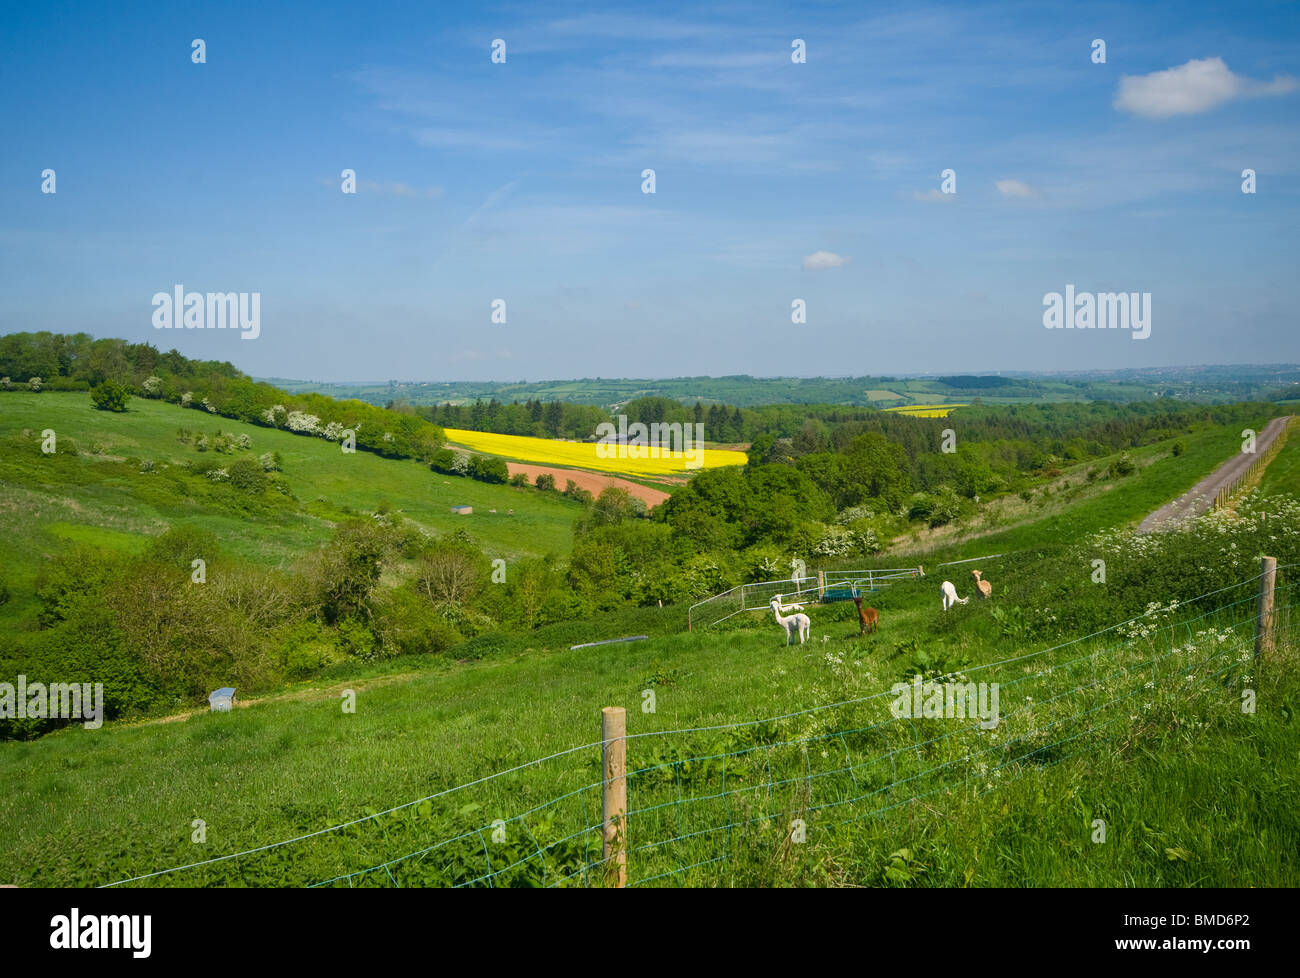 The Somerset Countryside As Seen From The A368 Somerset England mendip hills Stock Photo